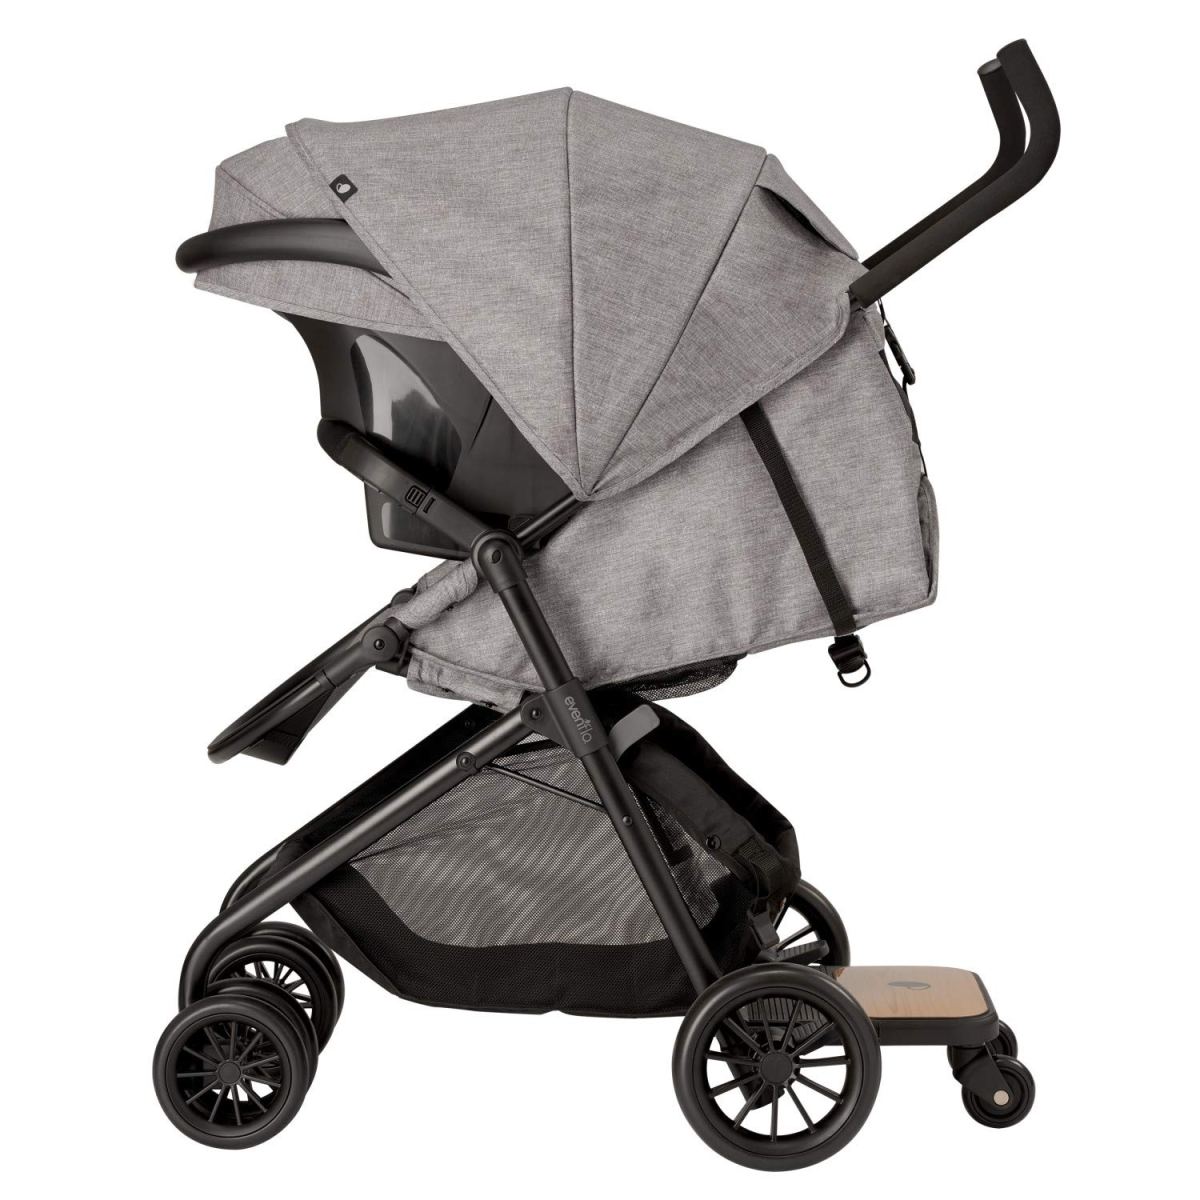 The Types of Baby Strollers